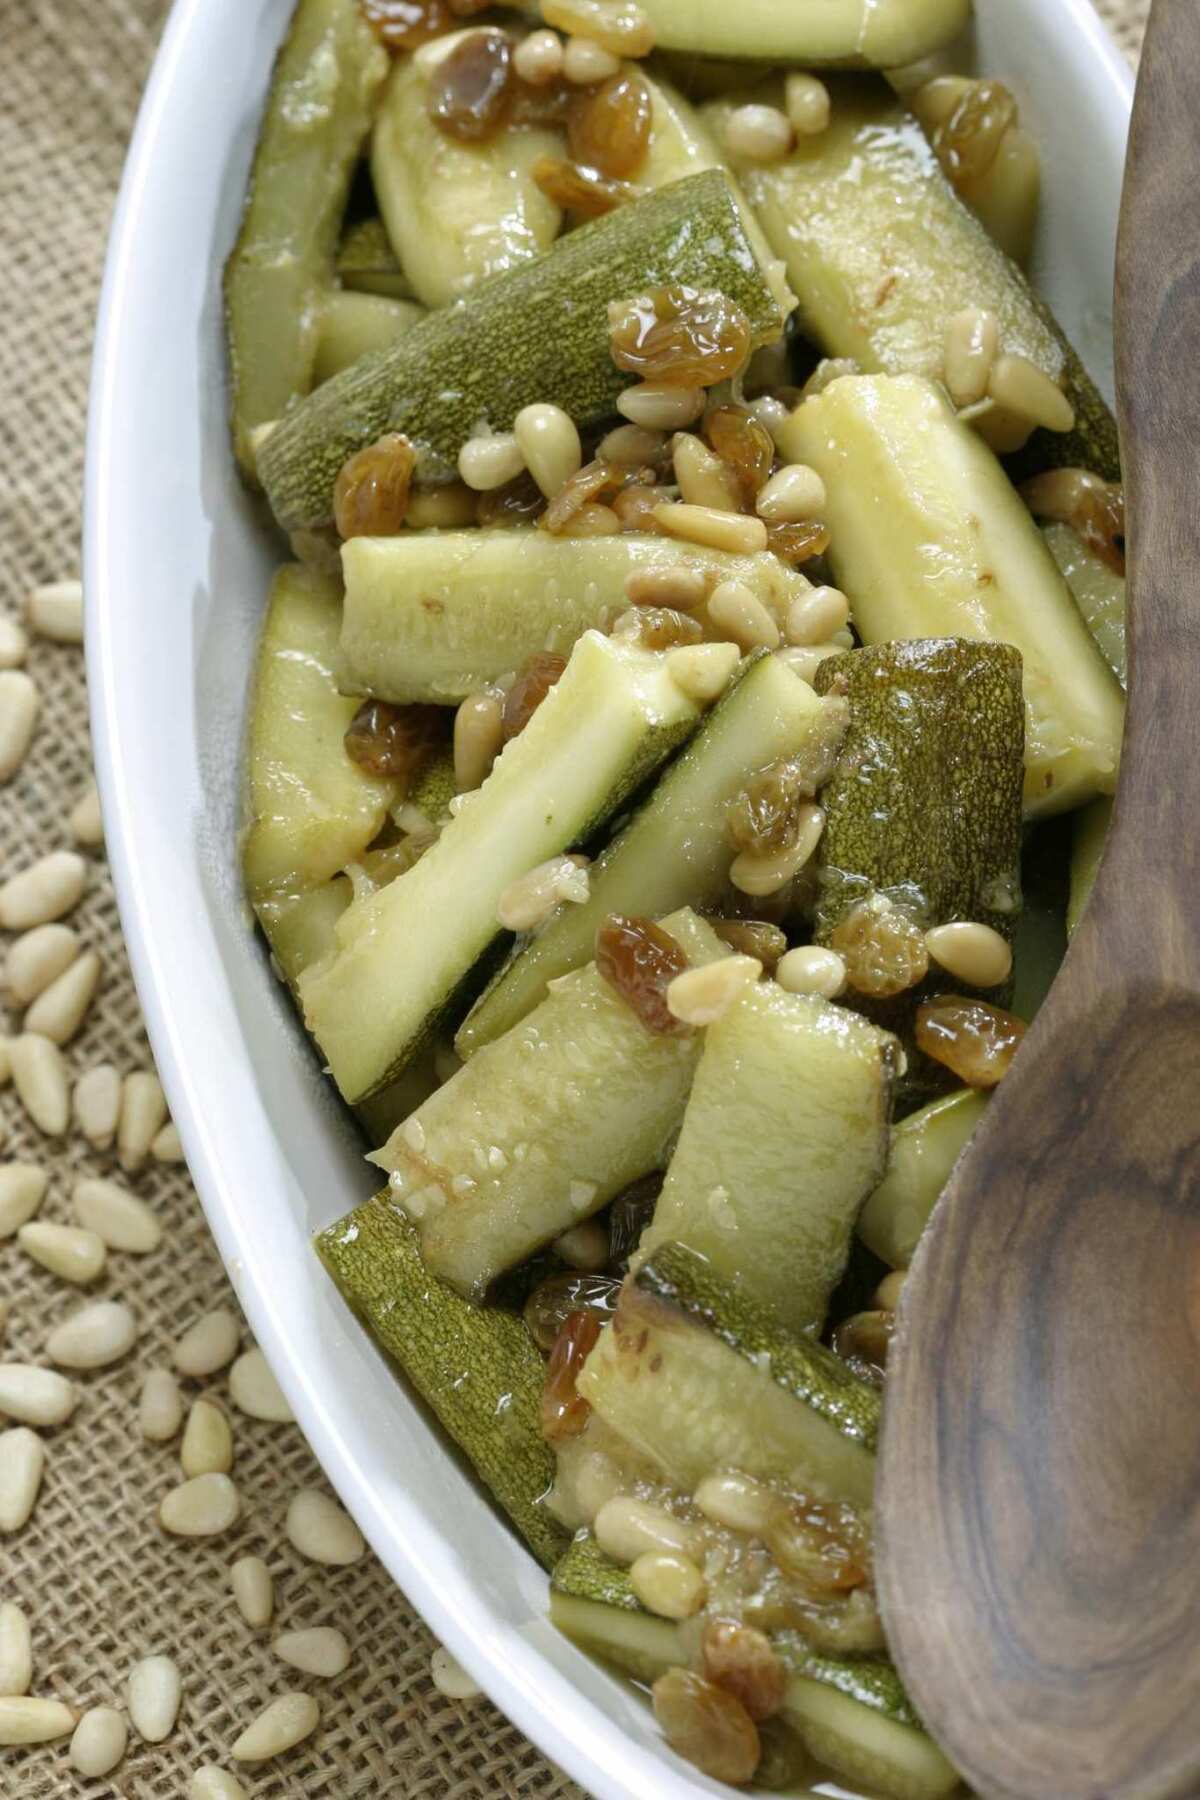 Zucchini with Italian agrodolce sauce makes a boldly flavored side dish for grilled meat.